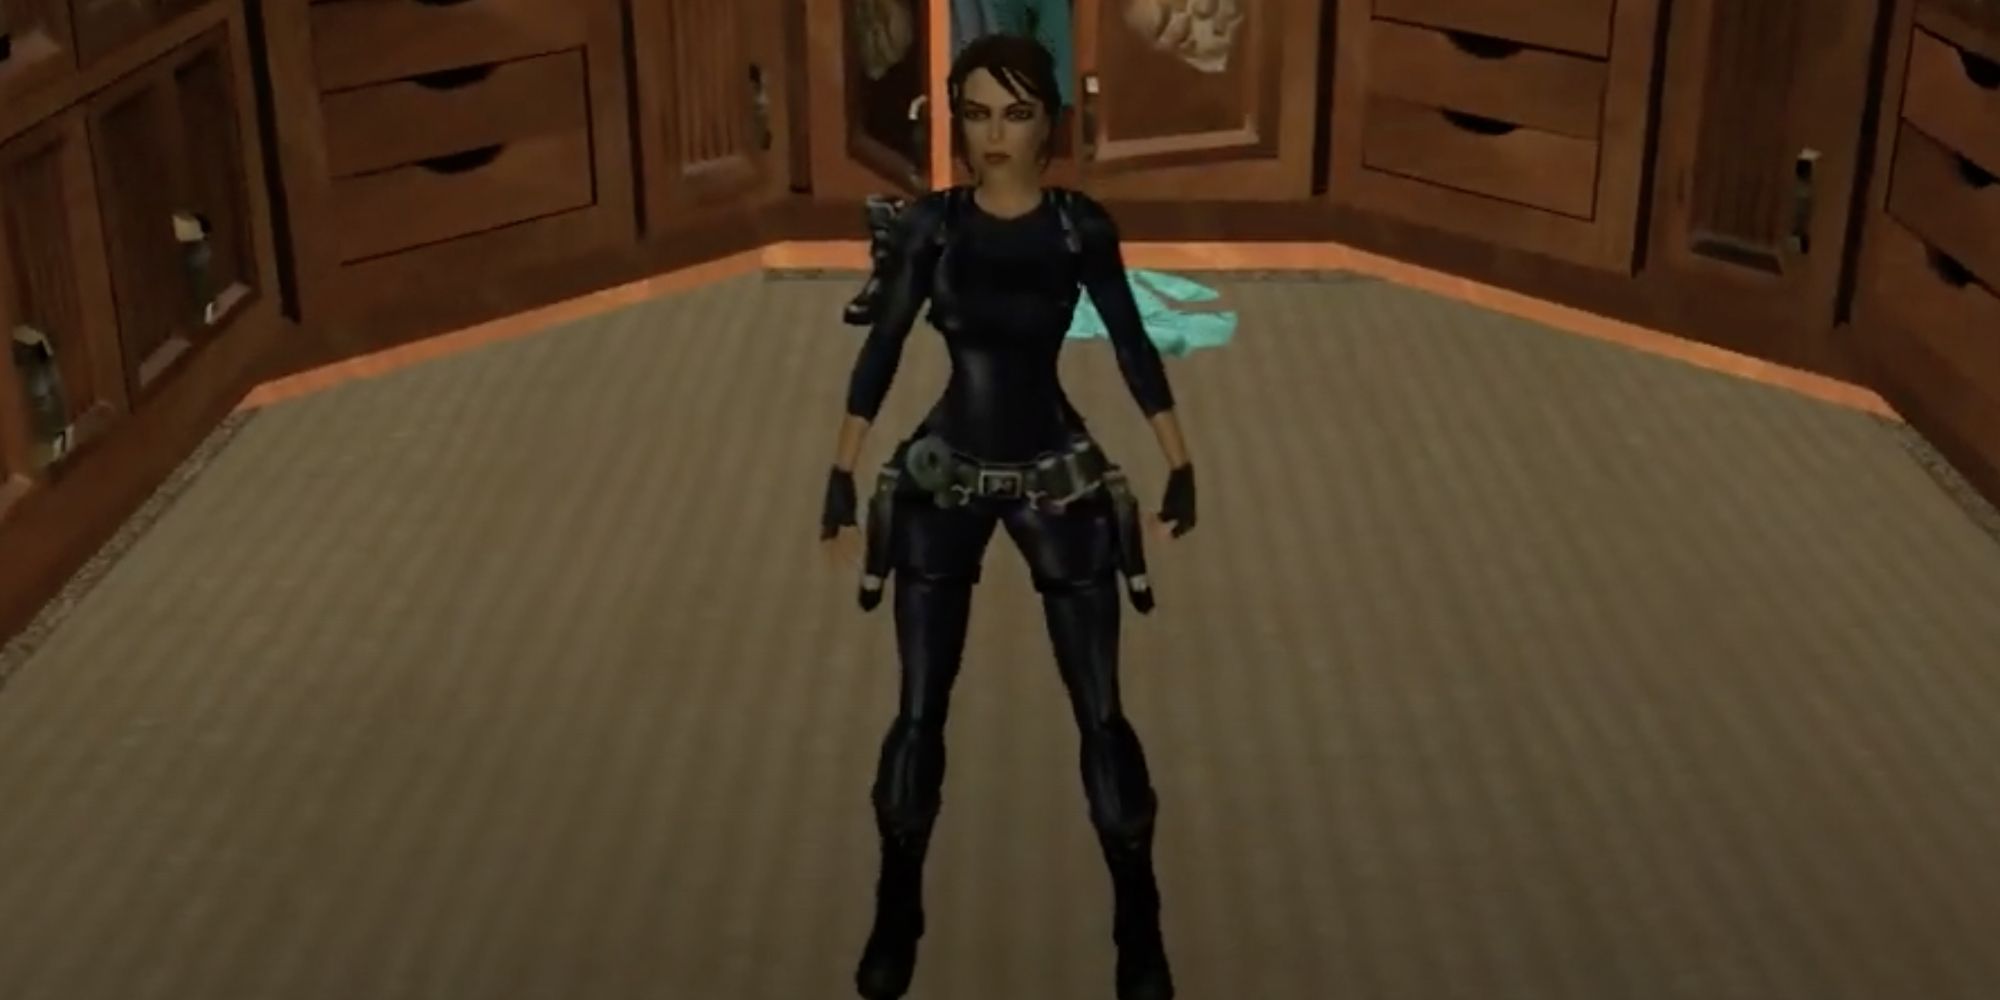 Lara donning the Catsuit outfit in Tomb Raider Legend.